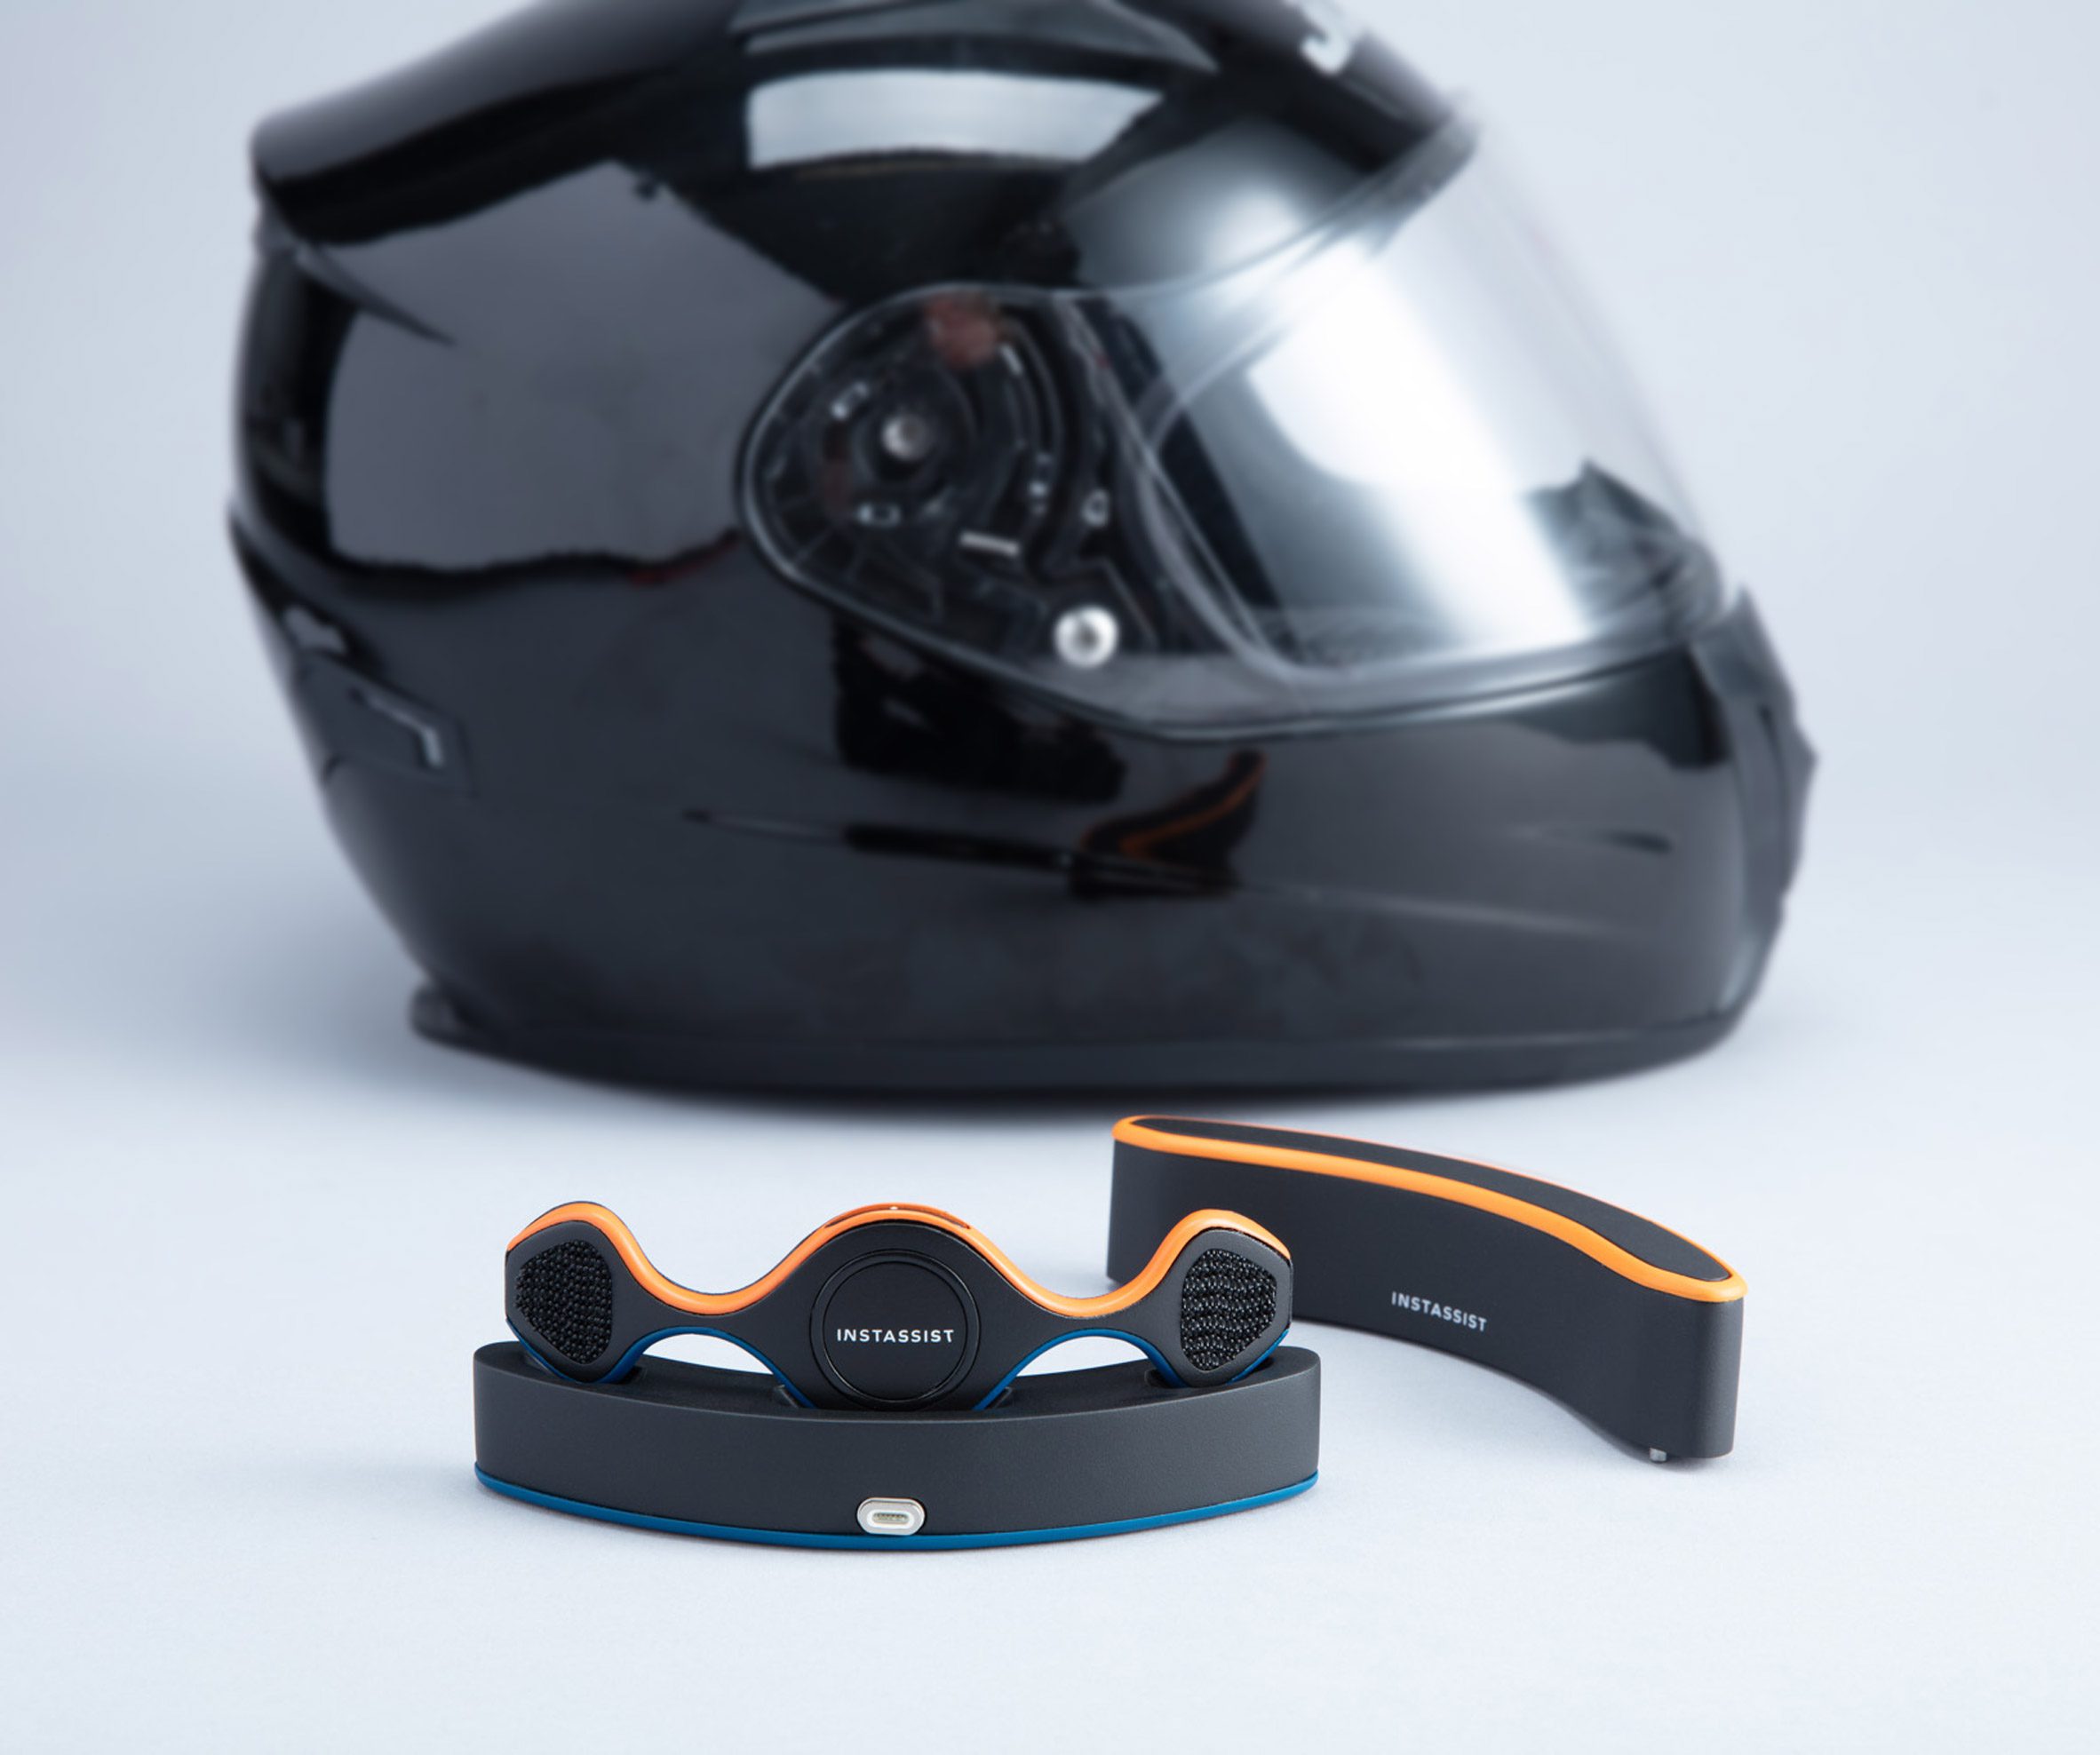 Motor accident detection device with motorcycle helmet displayed behind